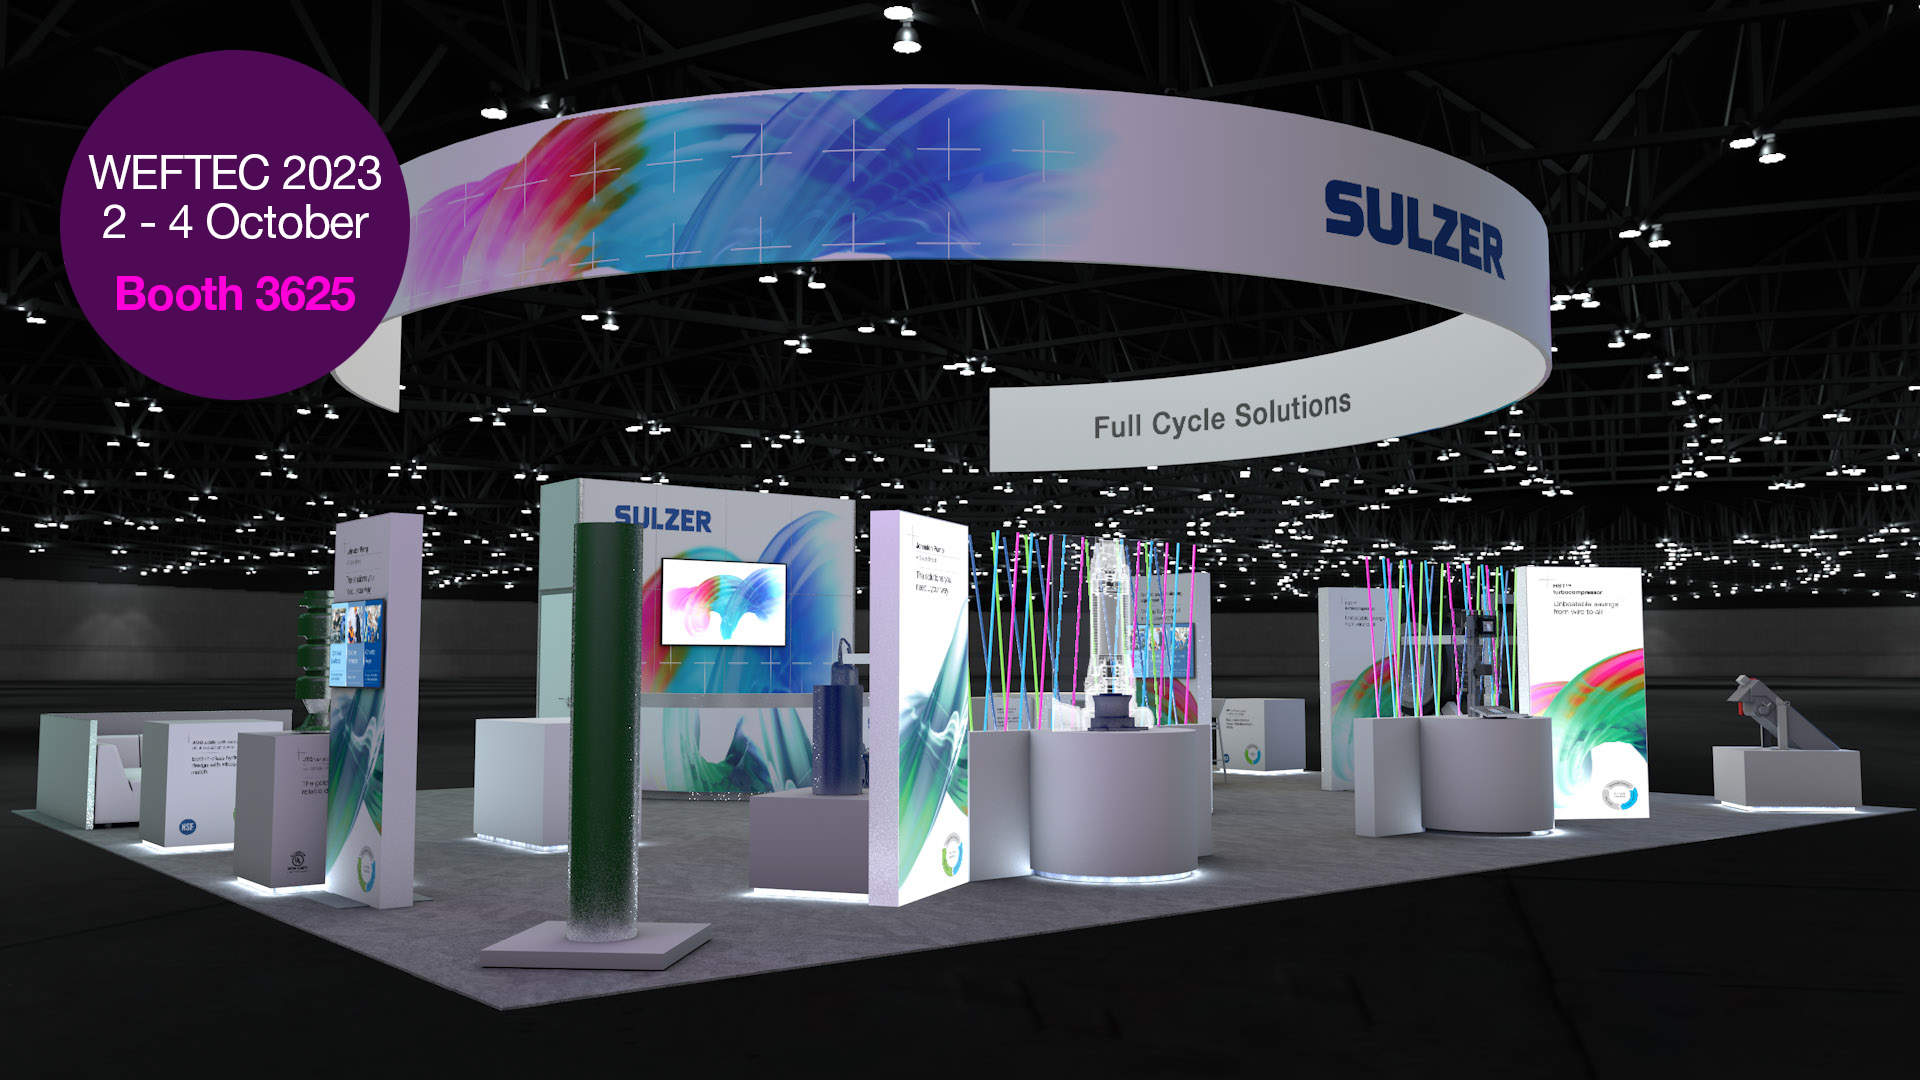 Sulzer will present new products and technologies for the water and wastewater sectors at booth 3625, WEFTEC 2023 on 2-4 October 2023